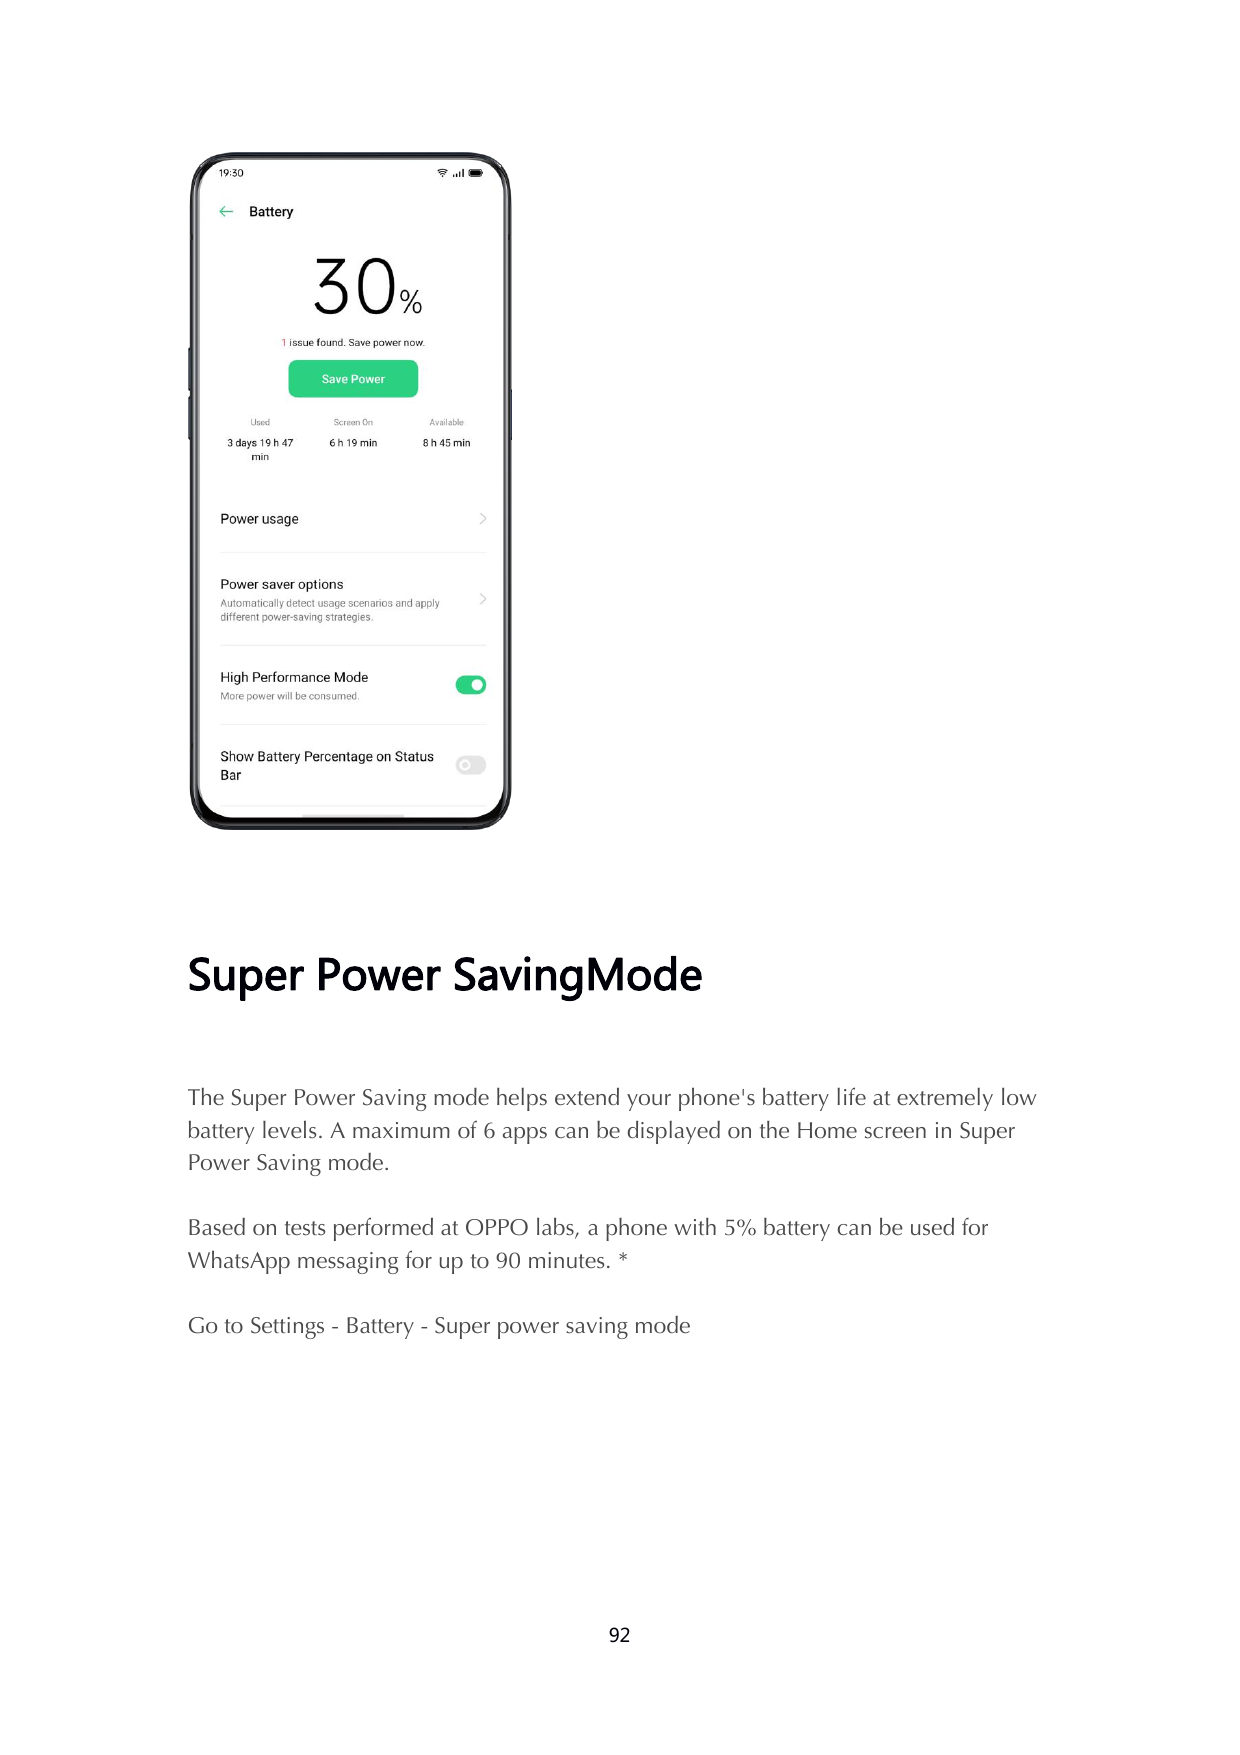 Super Power SavingModeThe Super Power Saving mode helps extend your phone's battery life at extremely lowbattery levels. A maxim